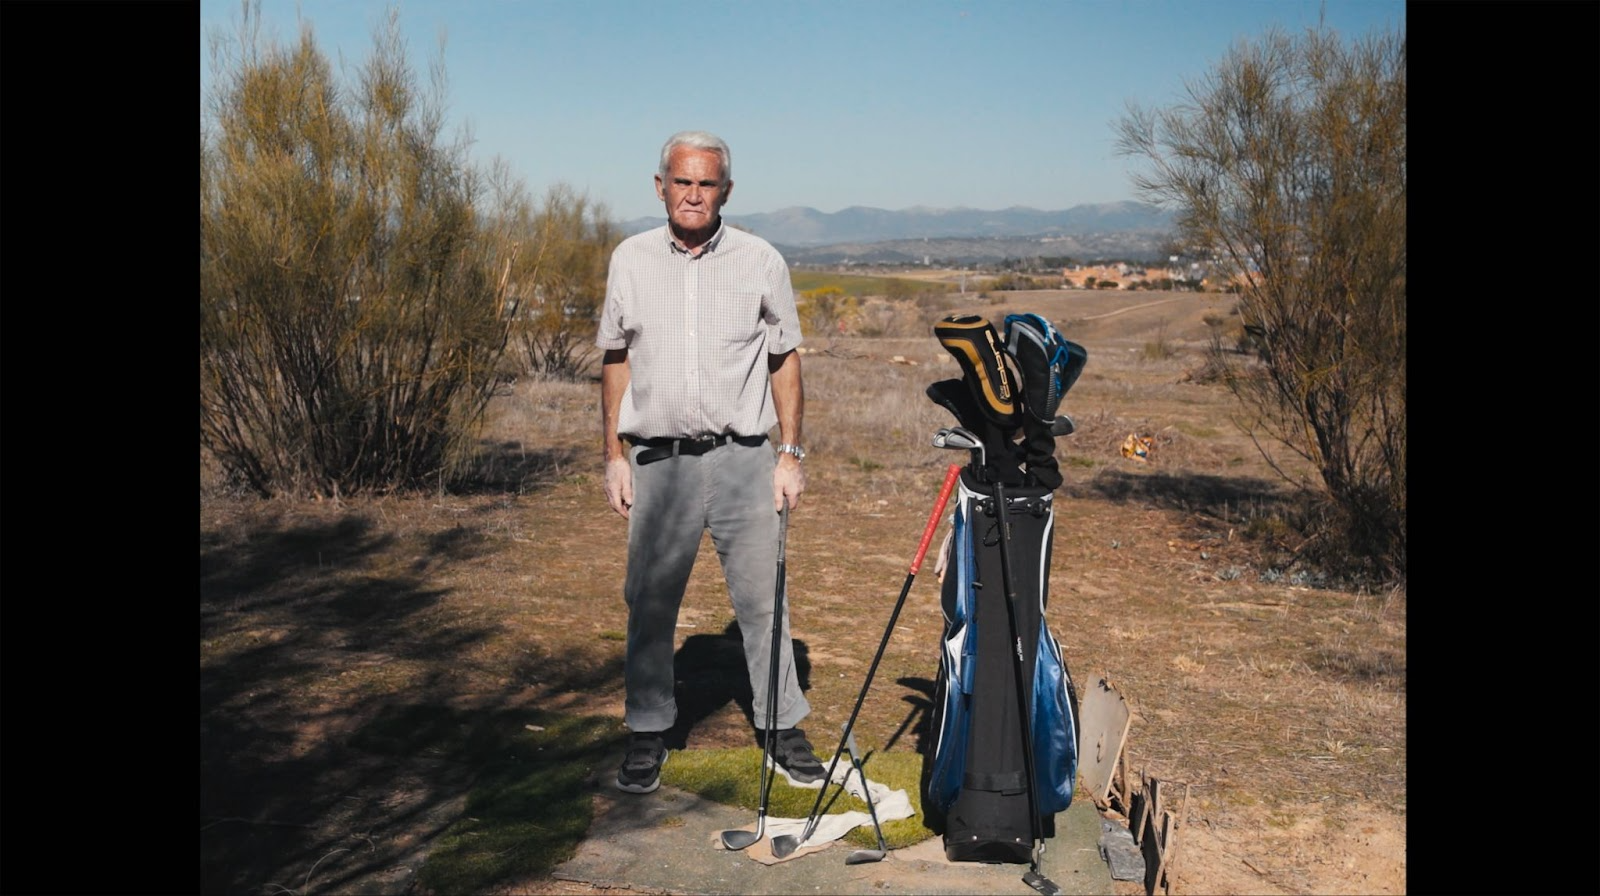 Portrait of an older man in a field, he has a golf club in his hand and next to him is the rest of the kit. He looks at the camera concentrated. The landscape is like a desert.